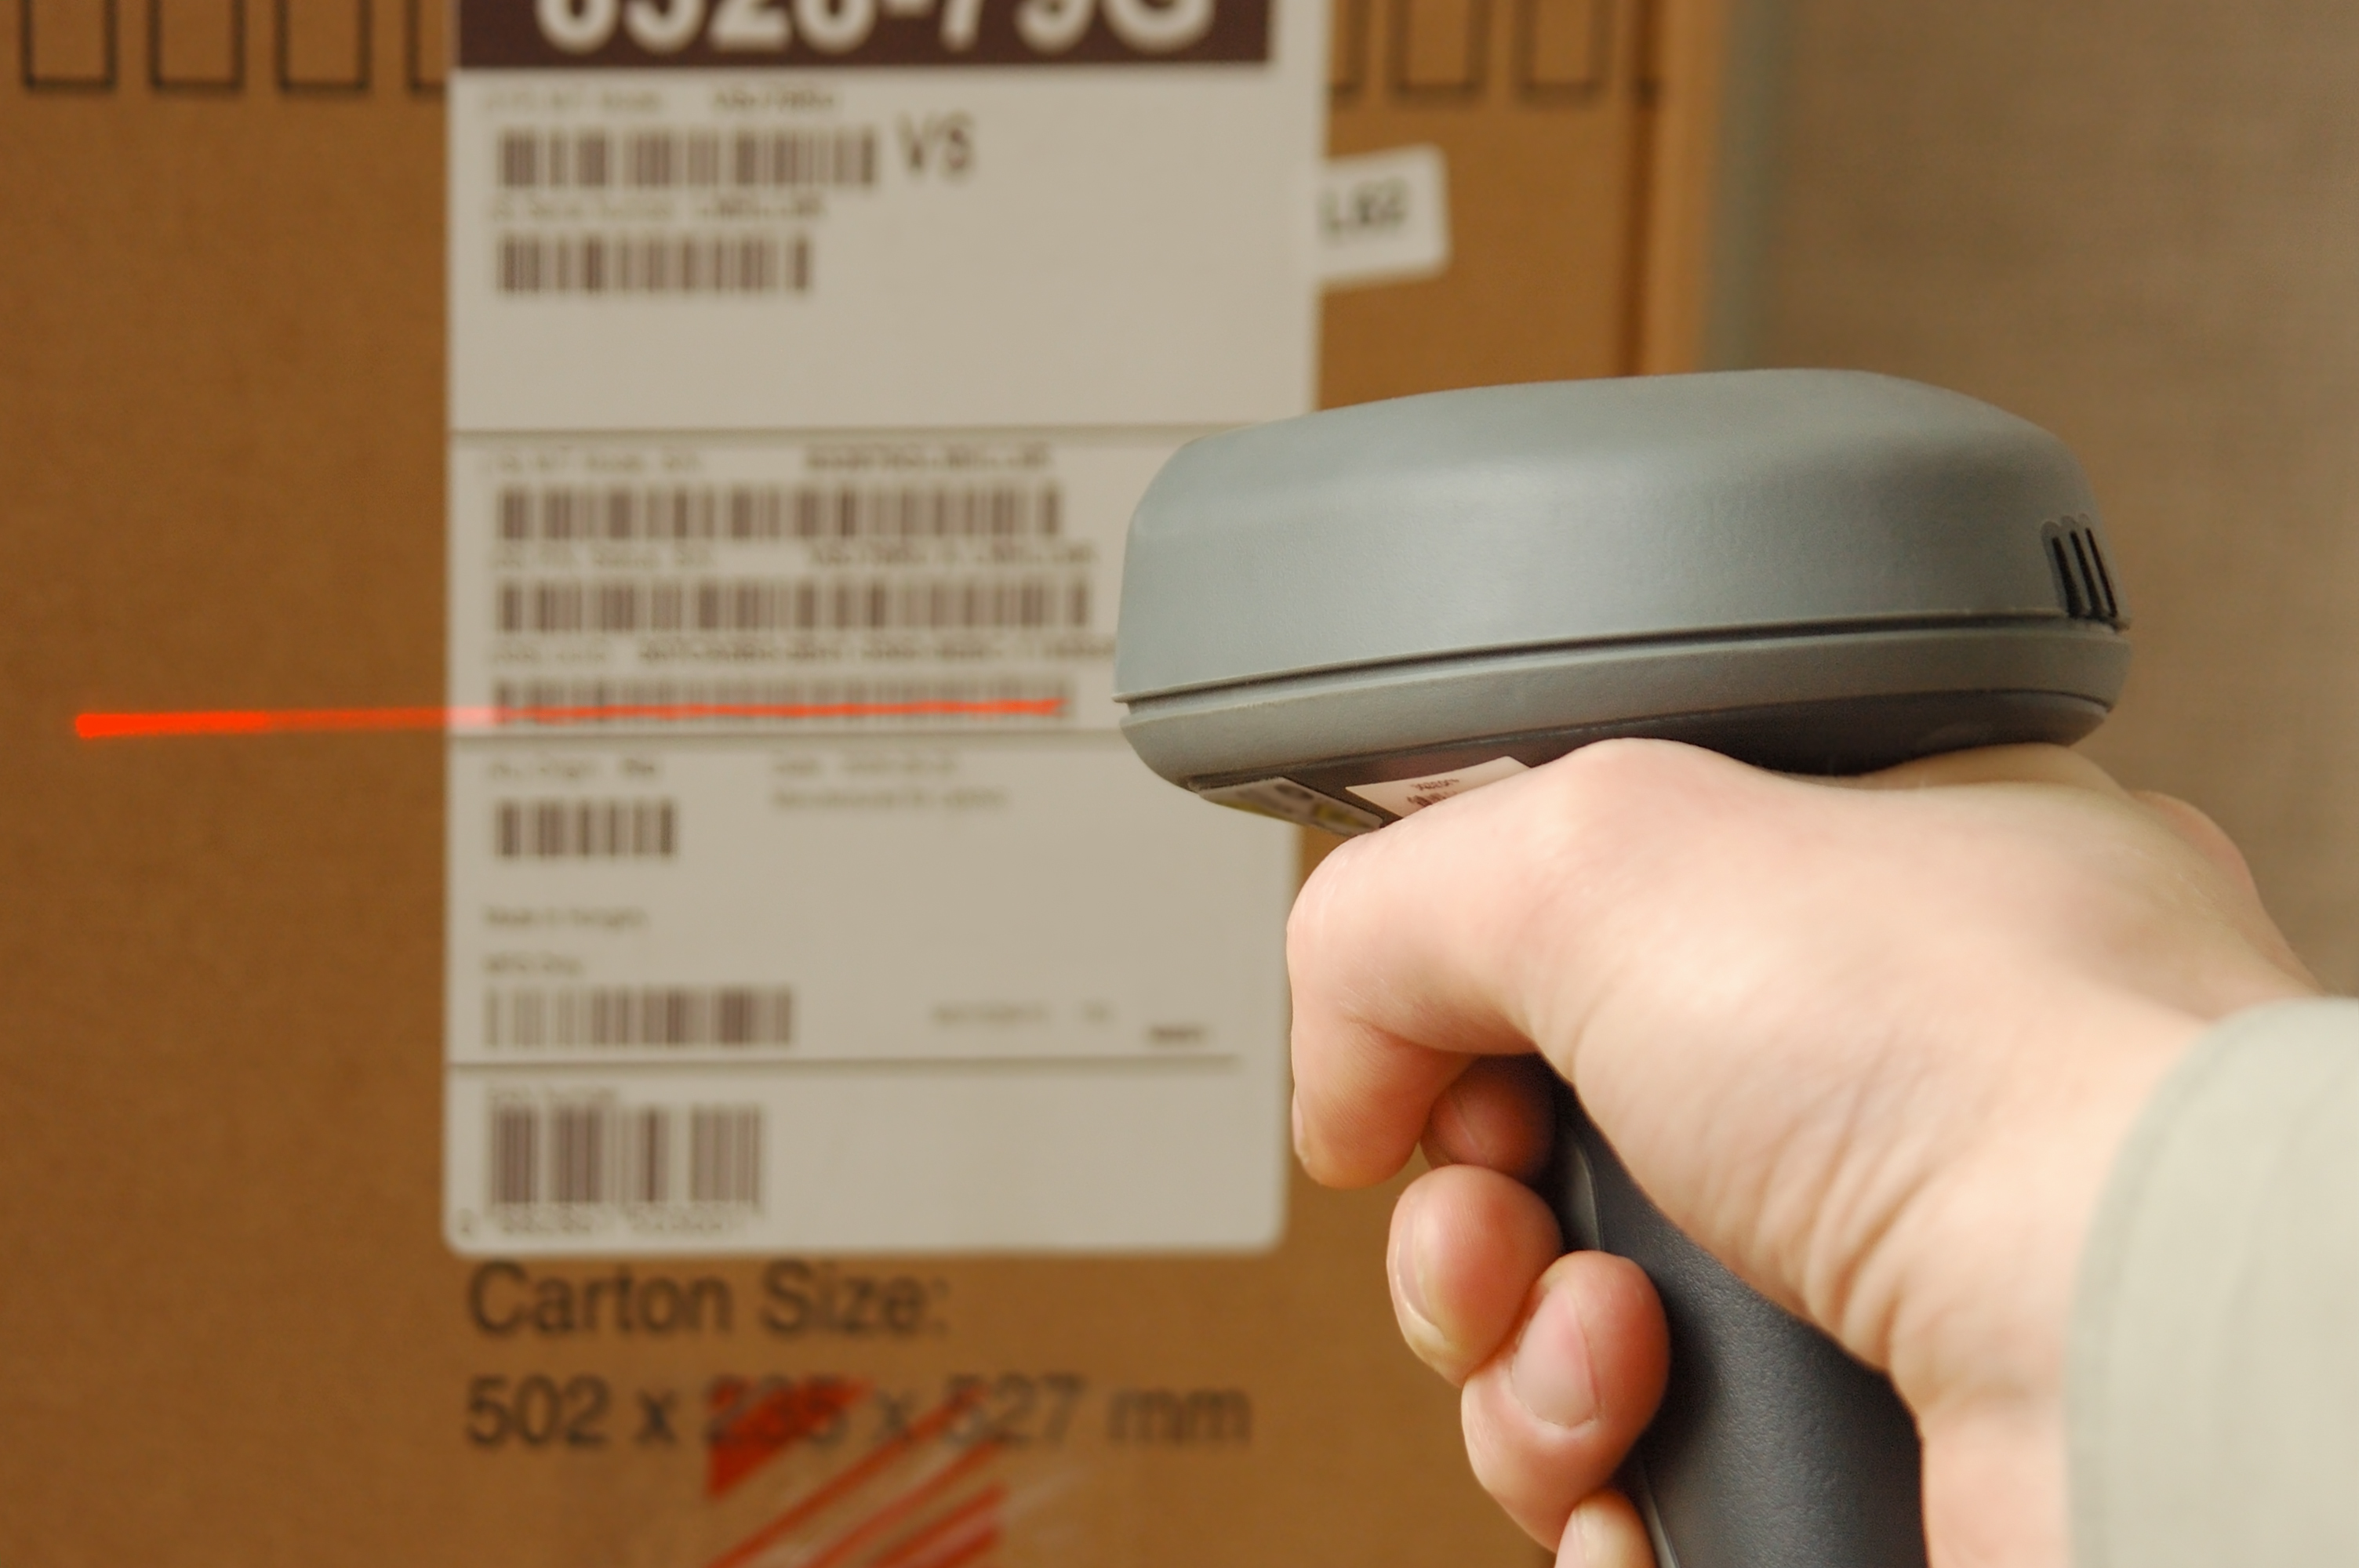 Material Check Barcode Scanner